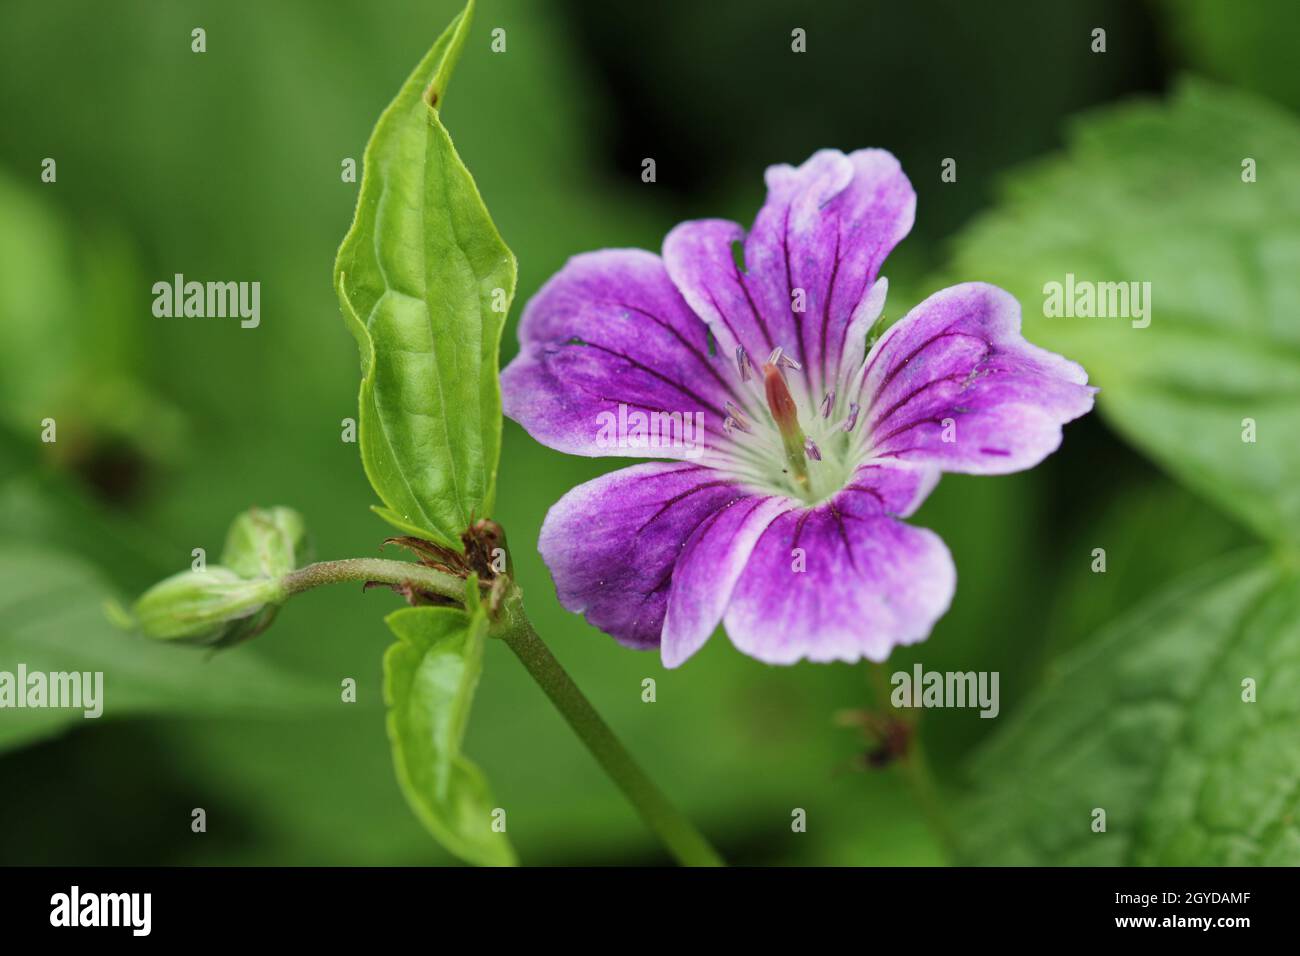 Purple with white margins knotted cranesbill, Geranium nodosum variety Whiteleaf, flower close up with a background of blurred leaves. Stock Photo